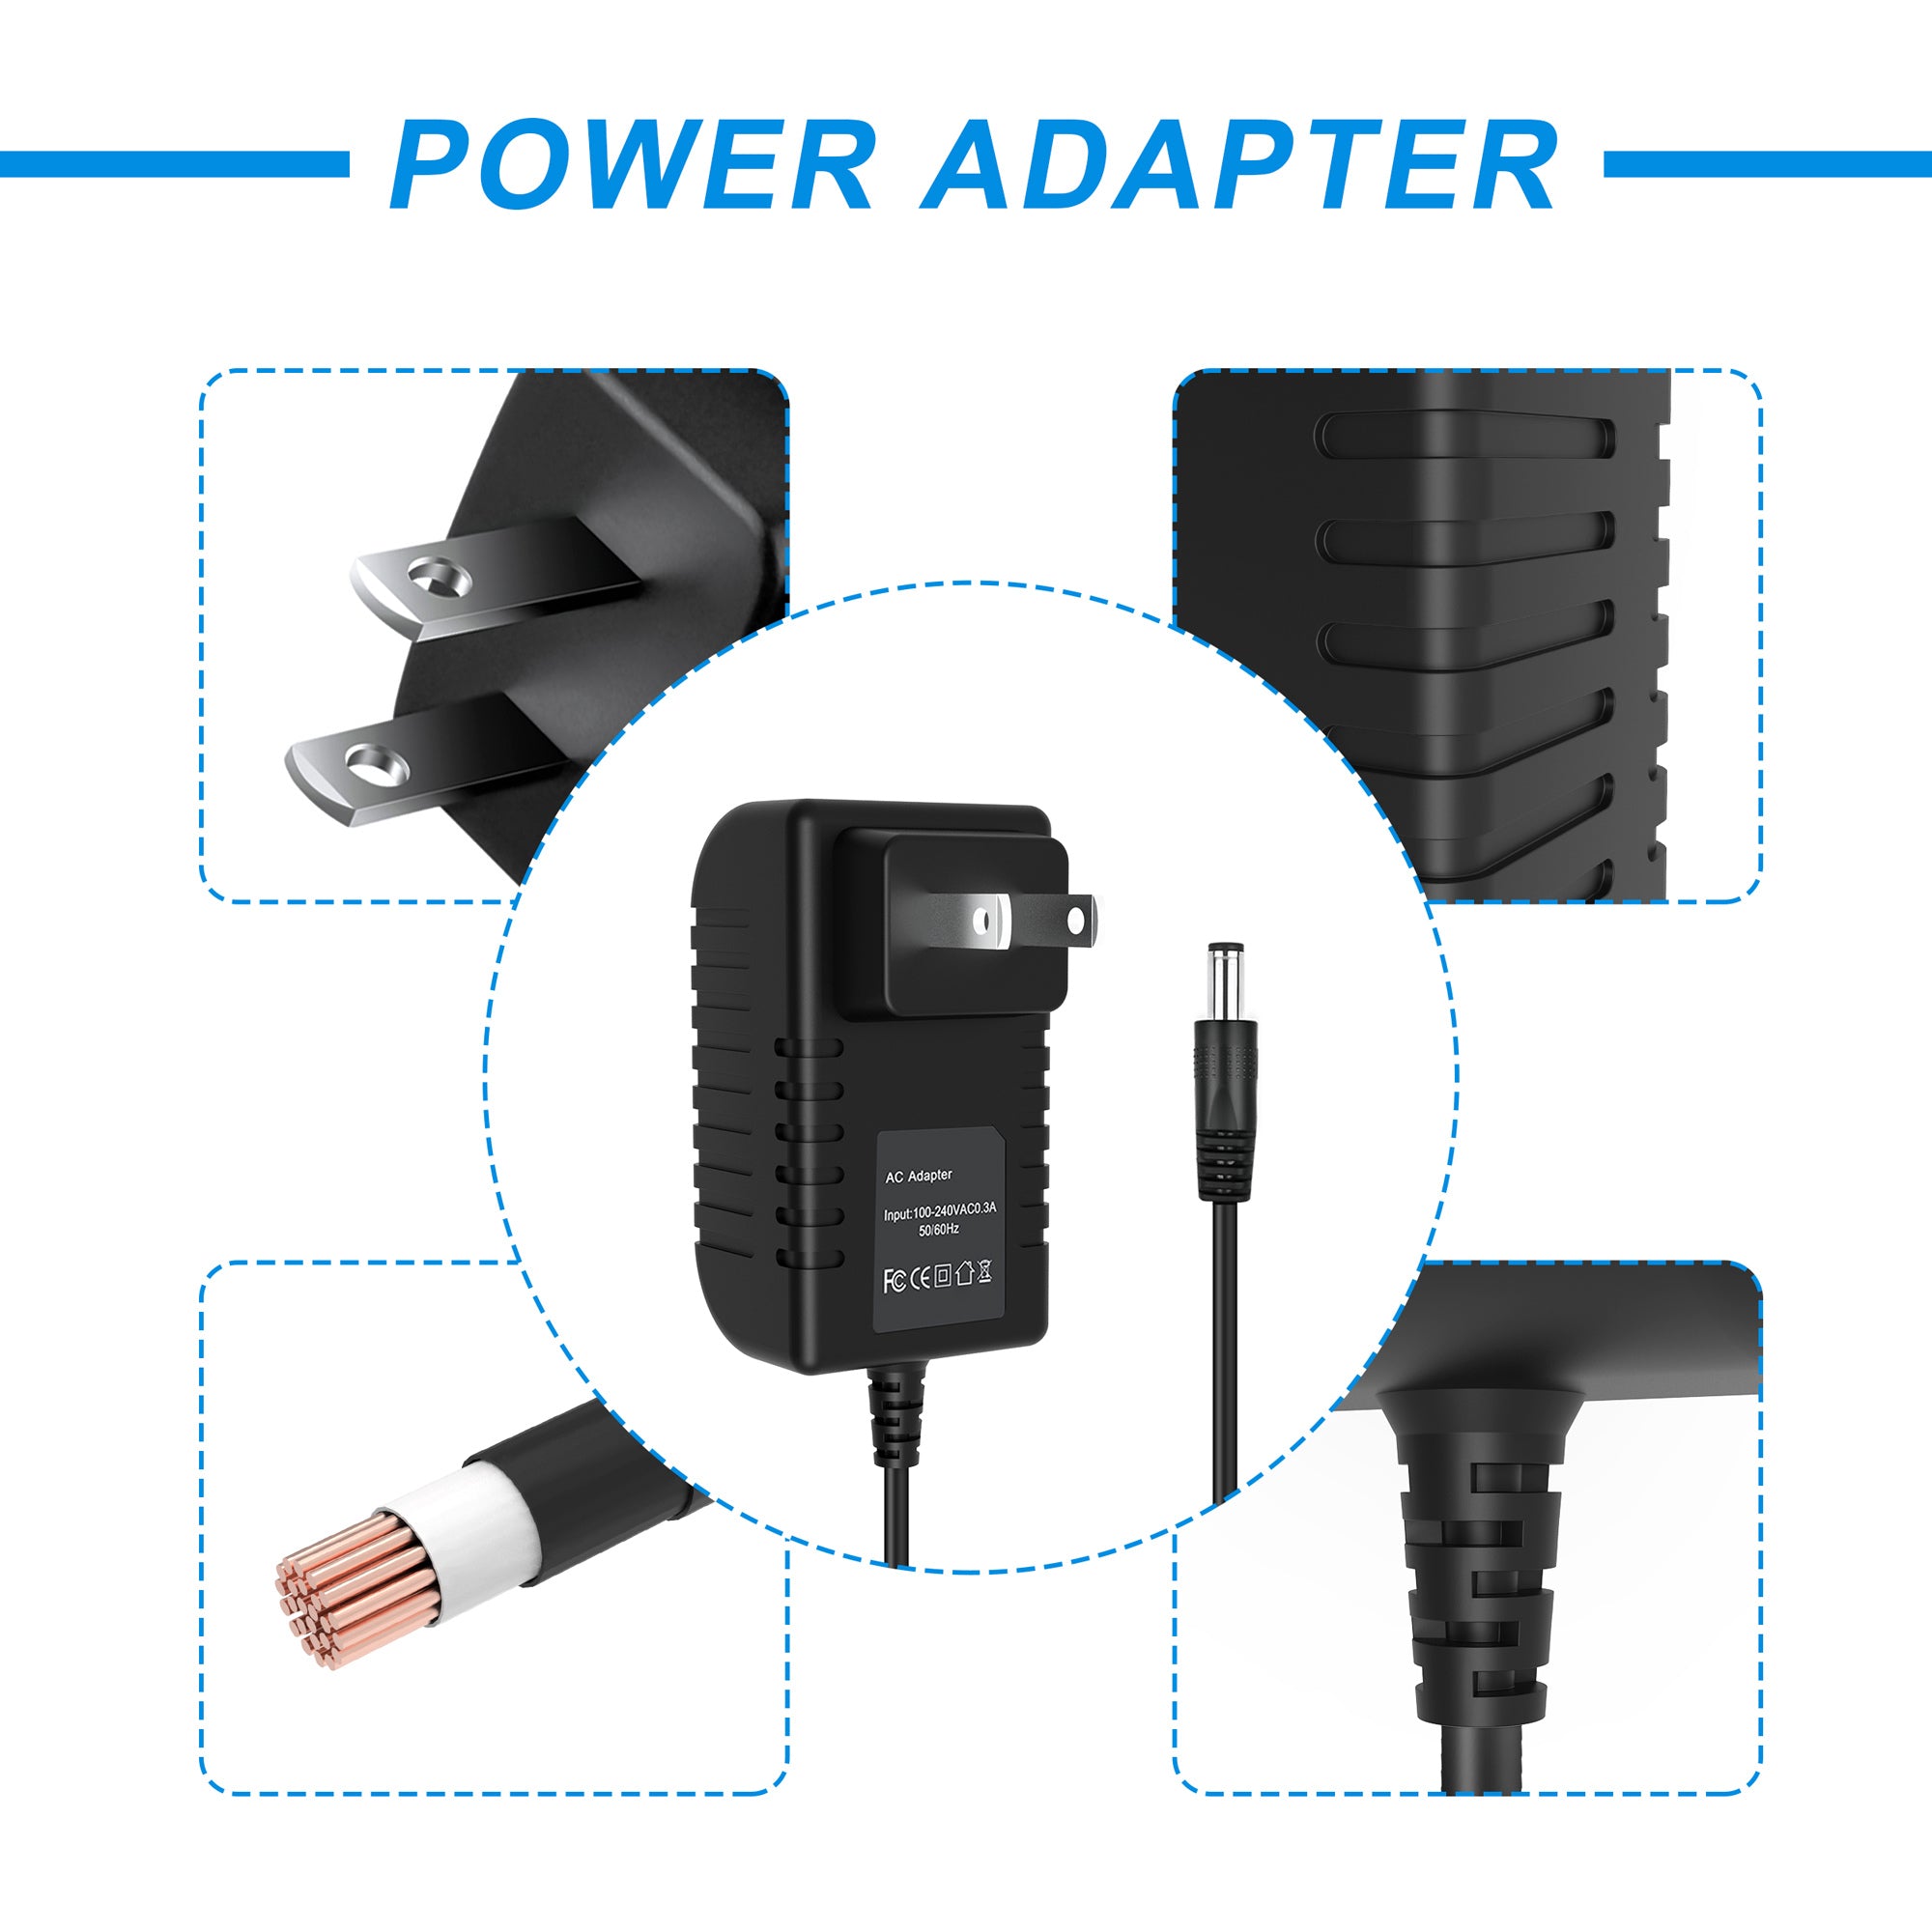 AbleGrid 9V AC DC Adapter Compatible with Android Model: YX10A03 10.1in Android Tablet PC 9VDC Power